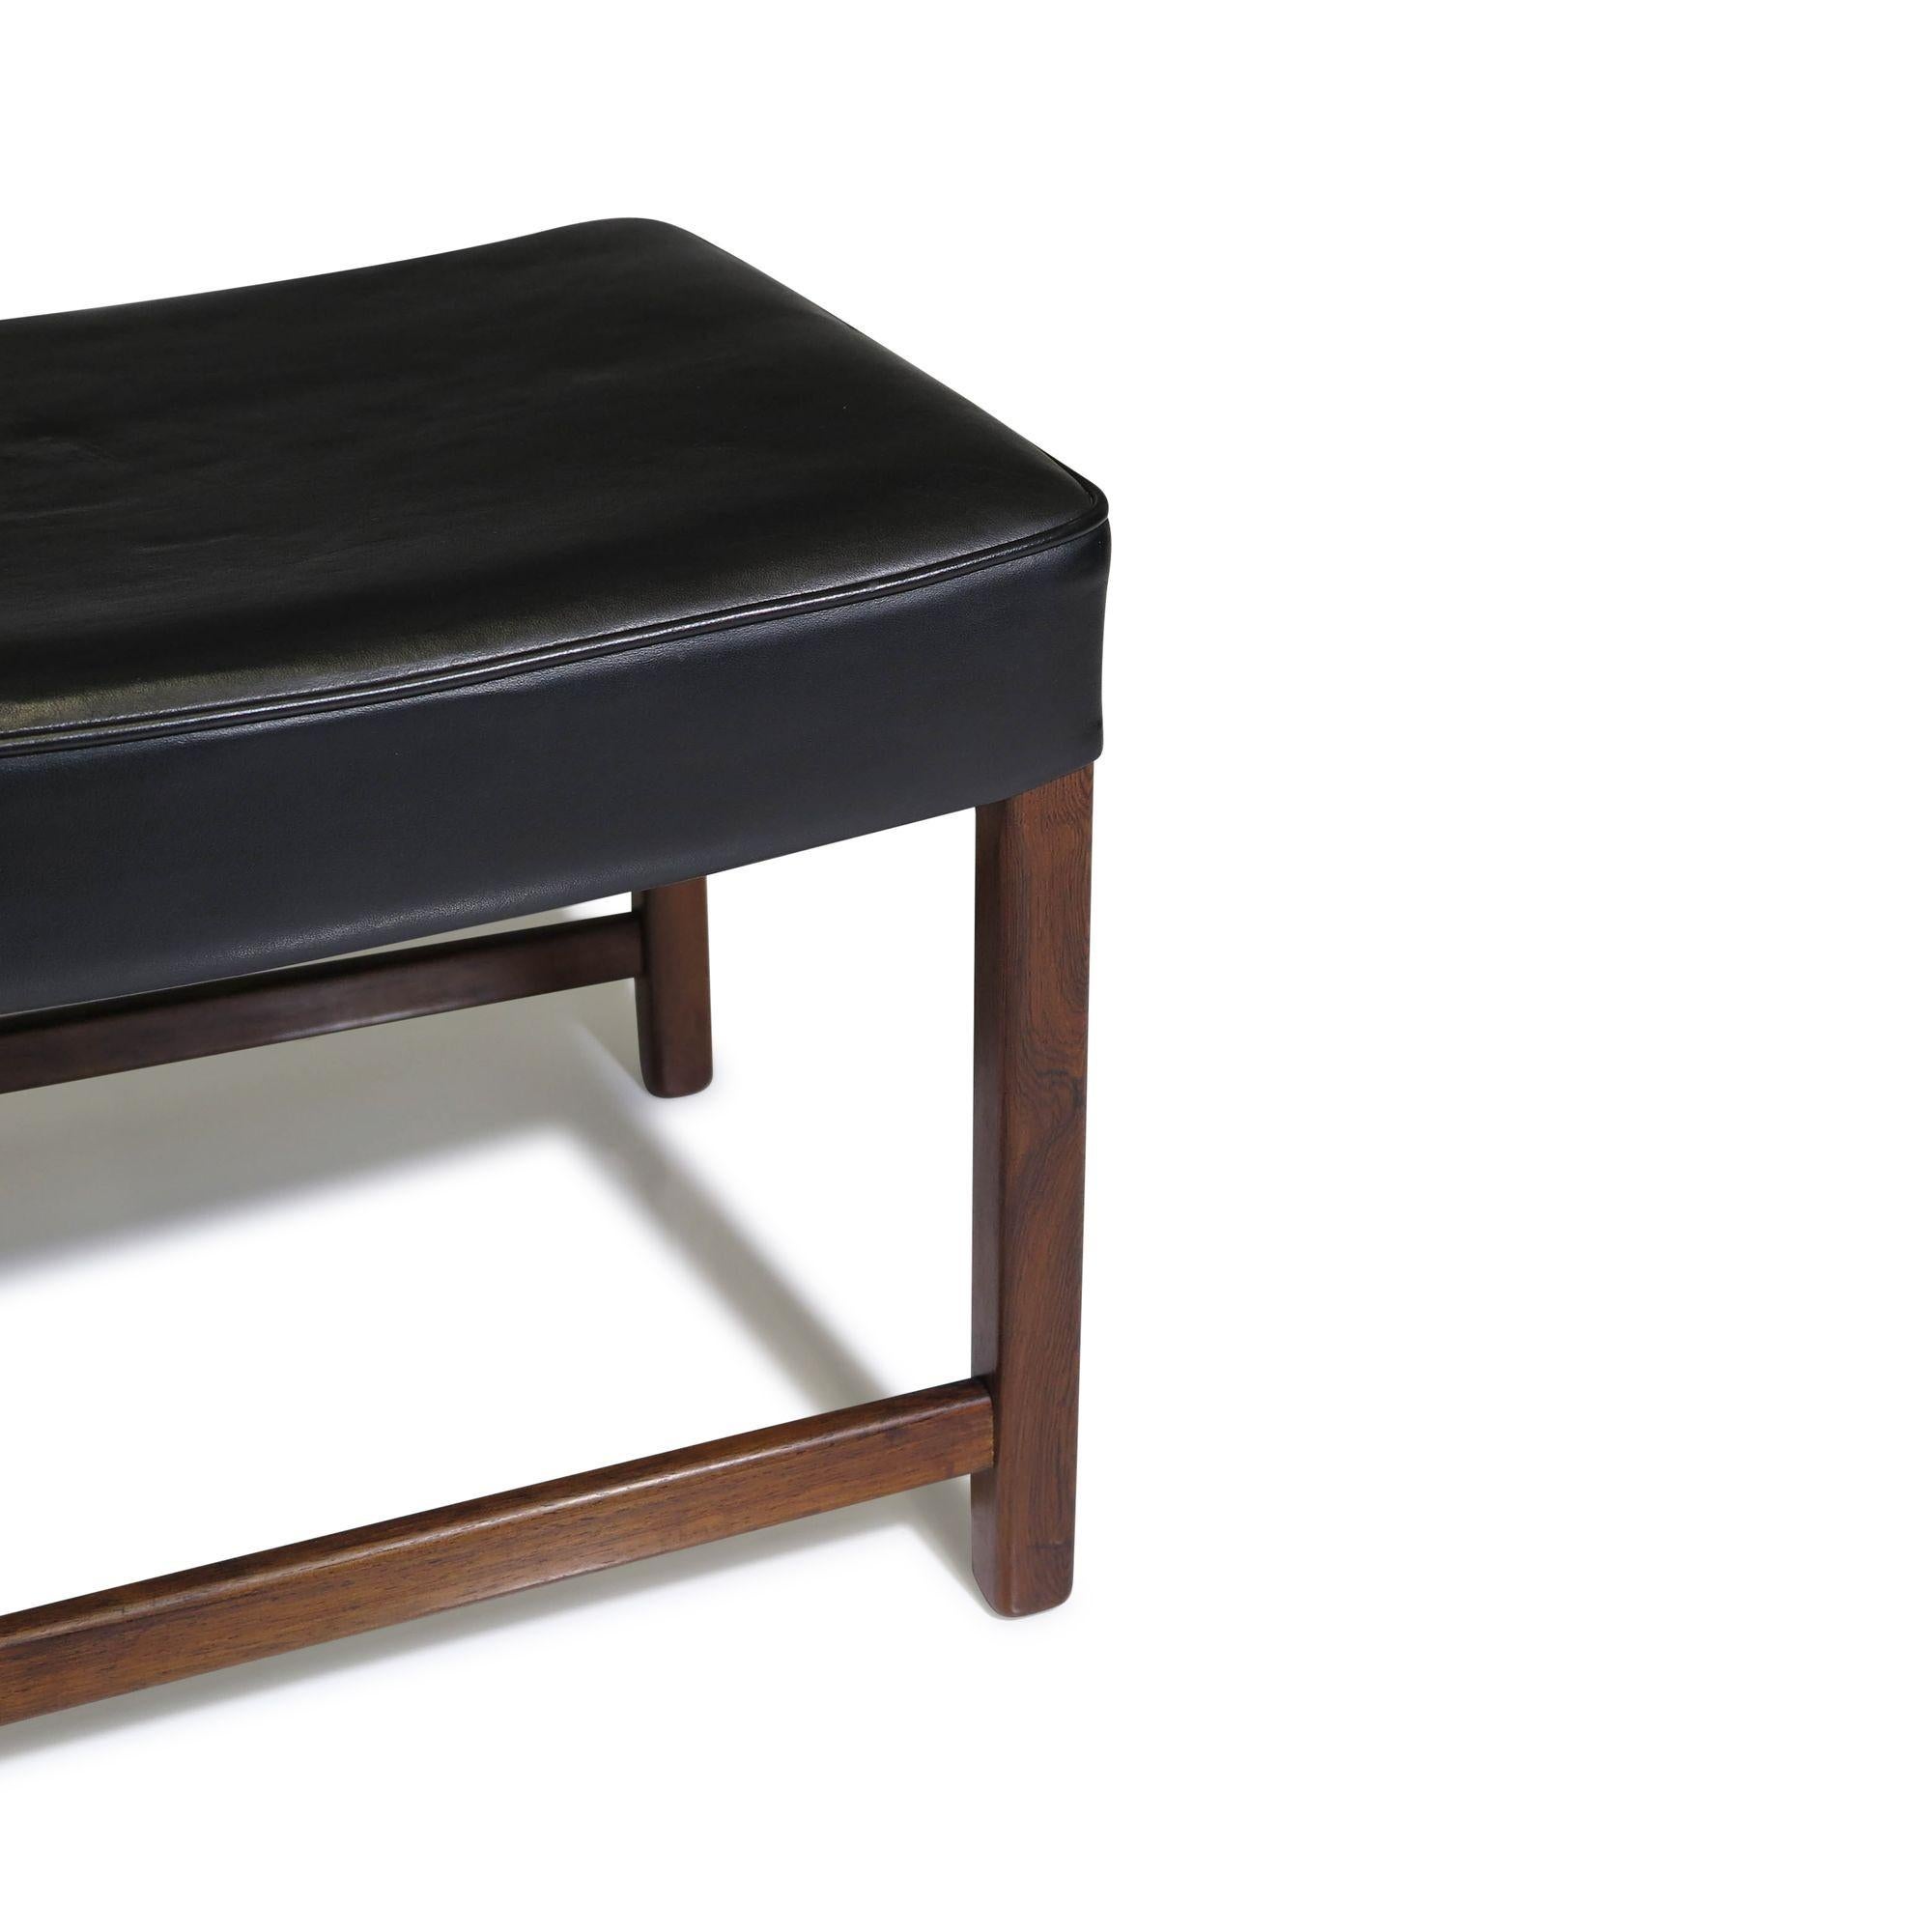 Oiled Fredrik Kayser Danish Rosewood Ottoman or Bench in Black Leather For Sale